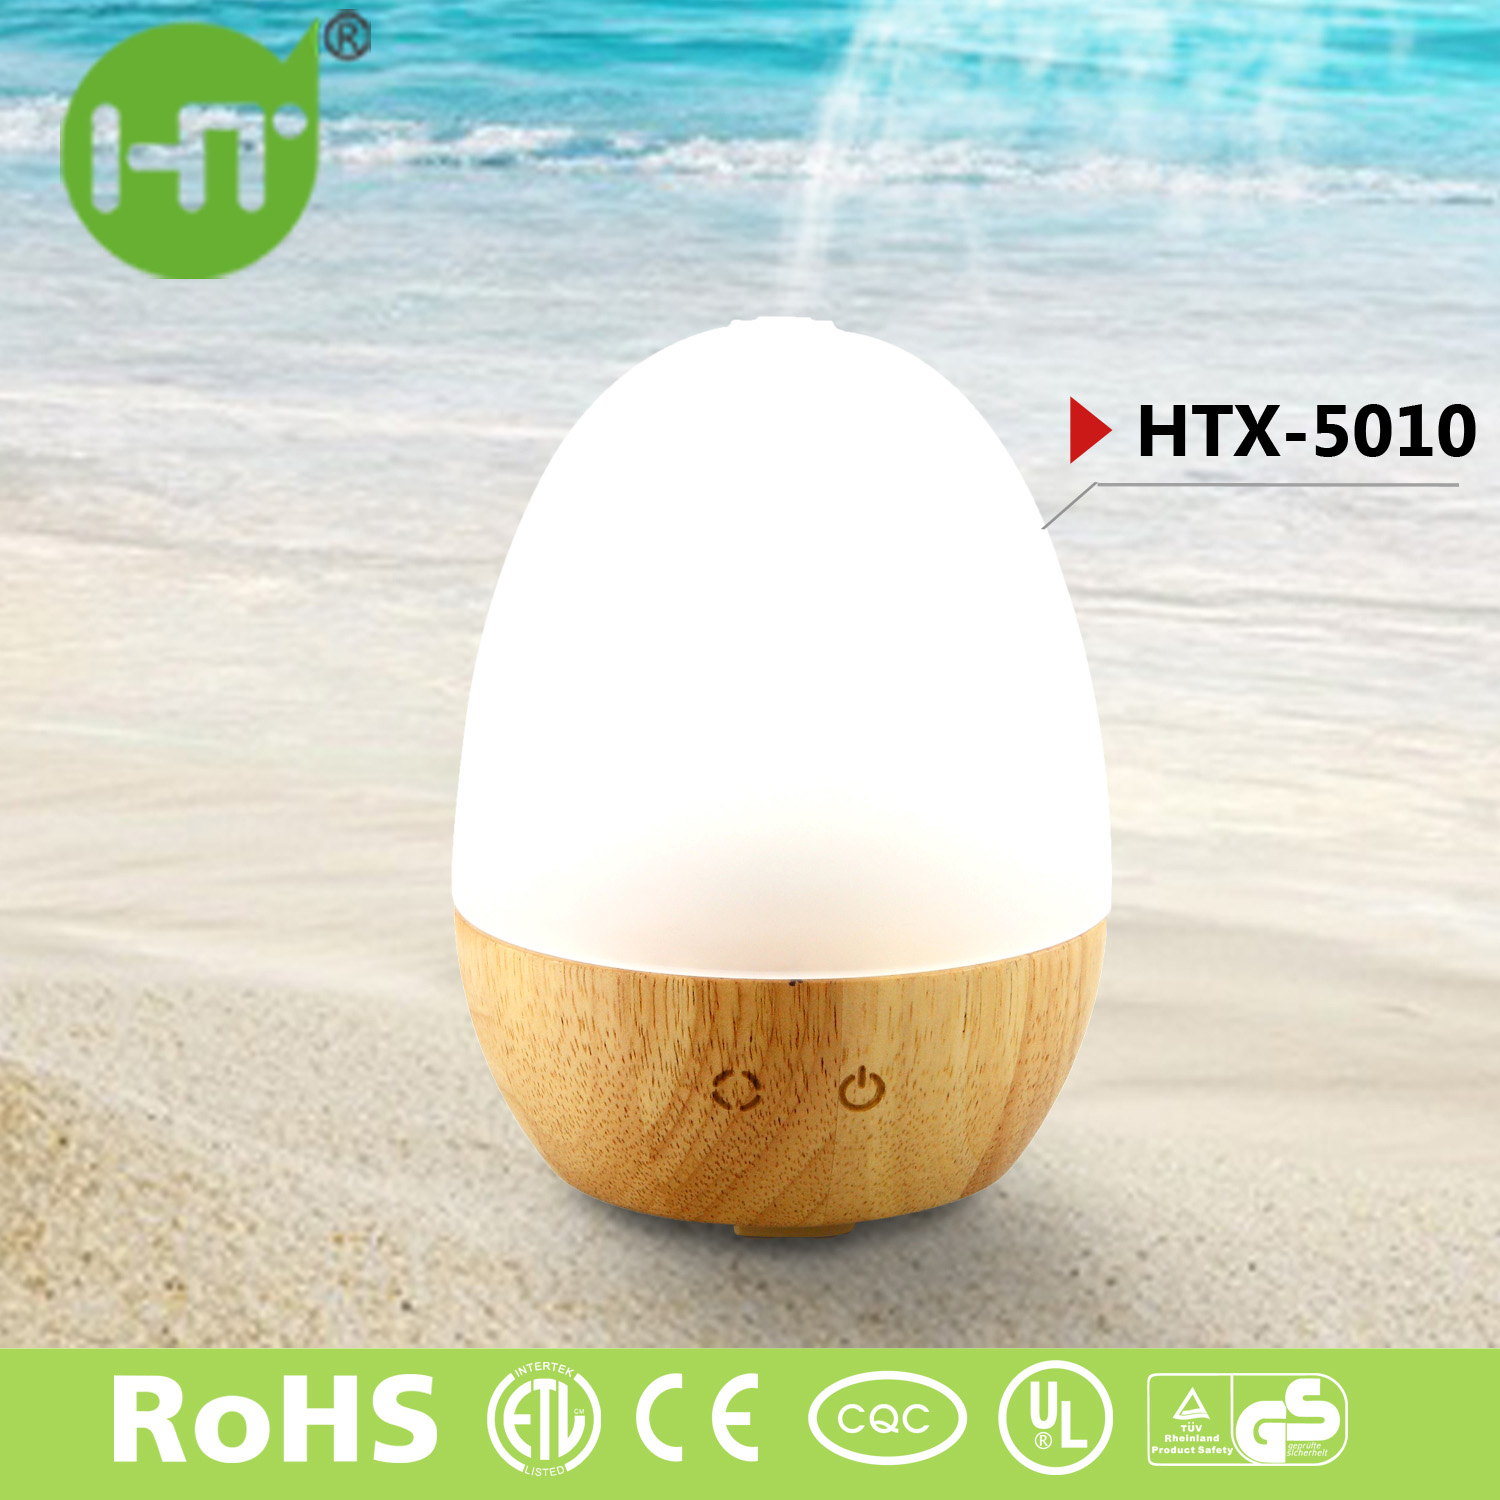 HTX-5010 Wooden Portable LED Rainbow Cool Mist Humidifier Aroma Essential Oil Diffuser